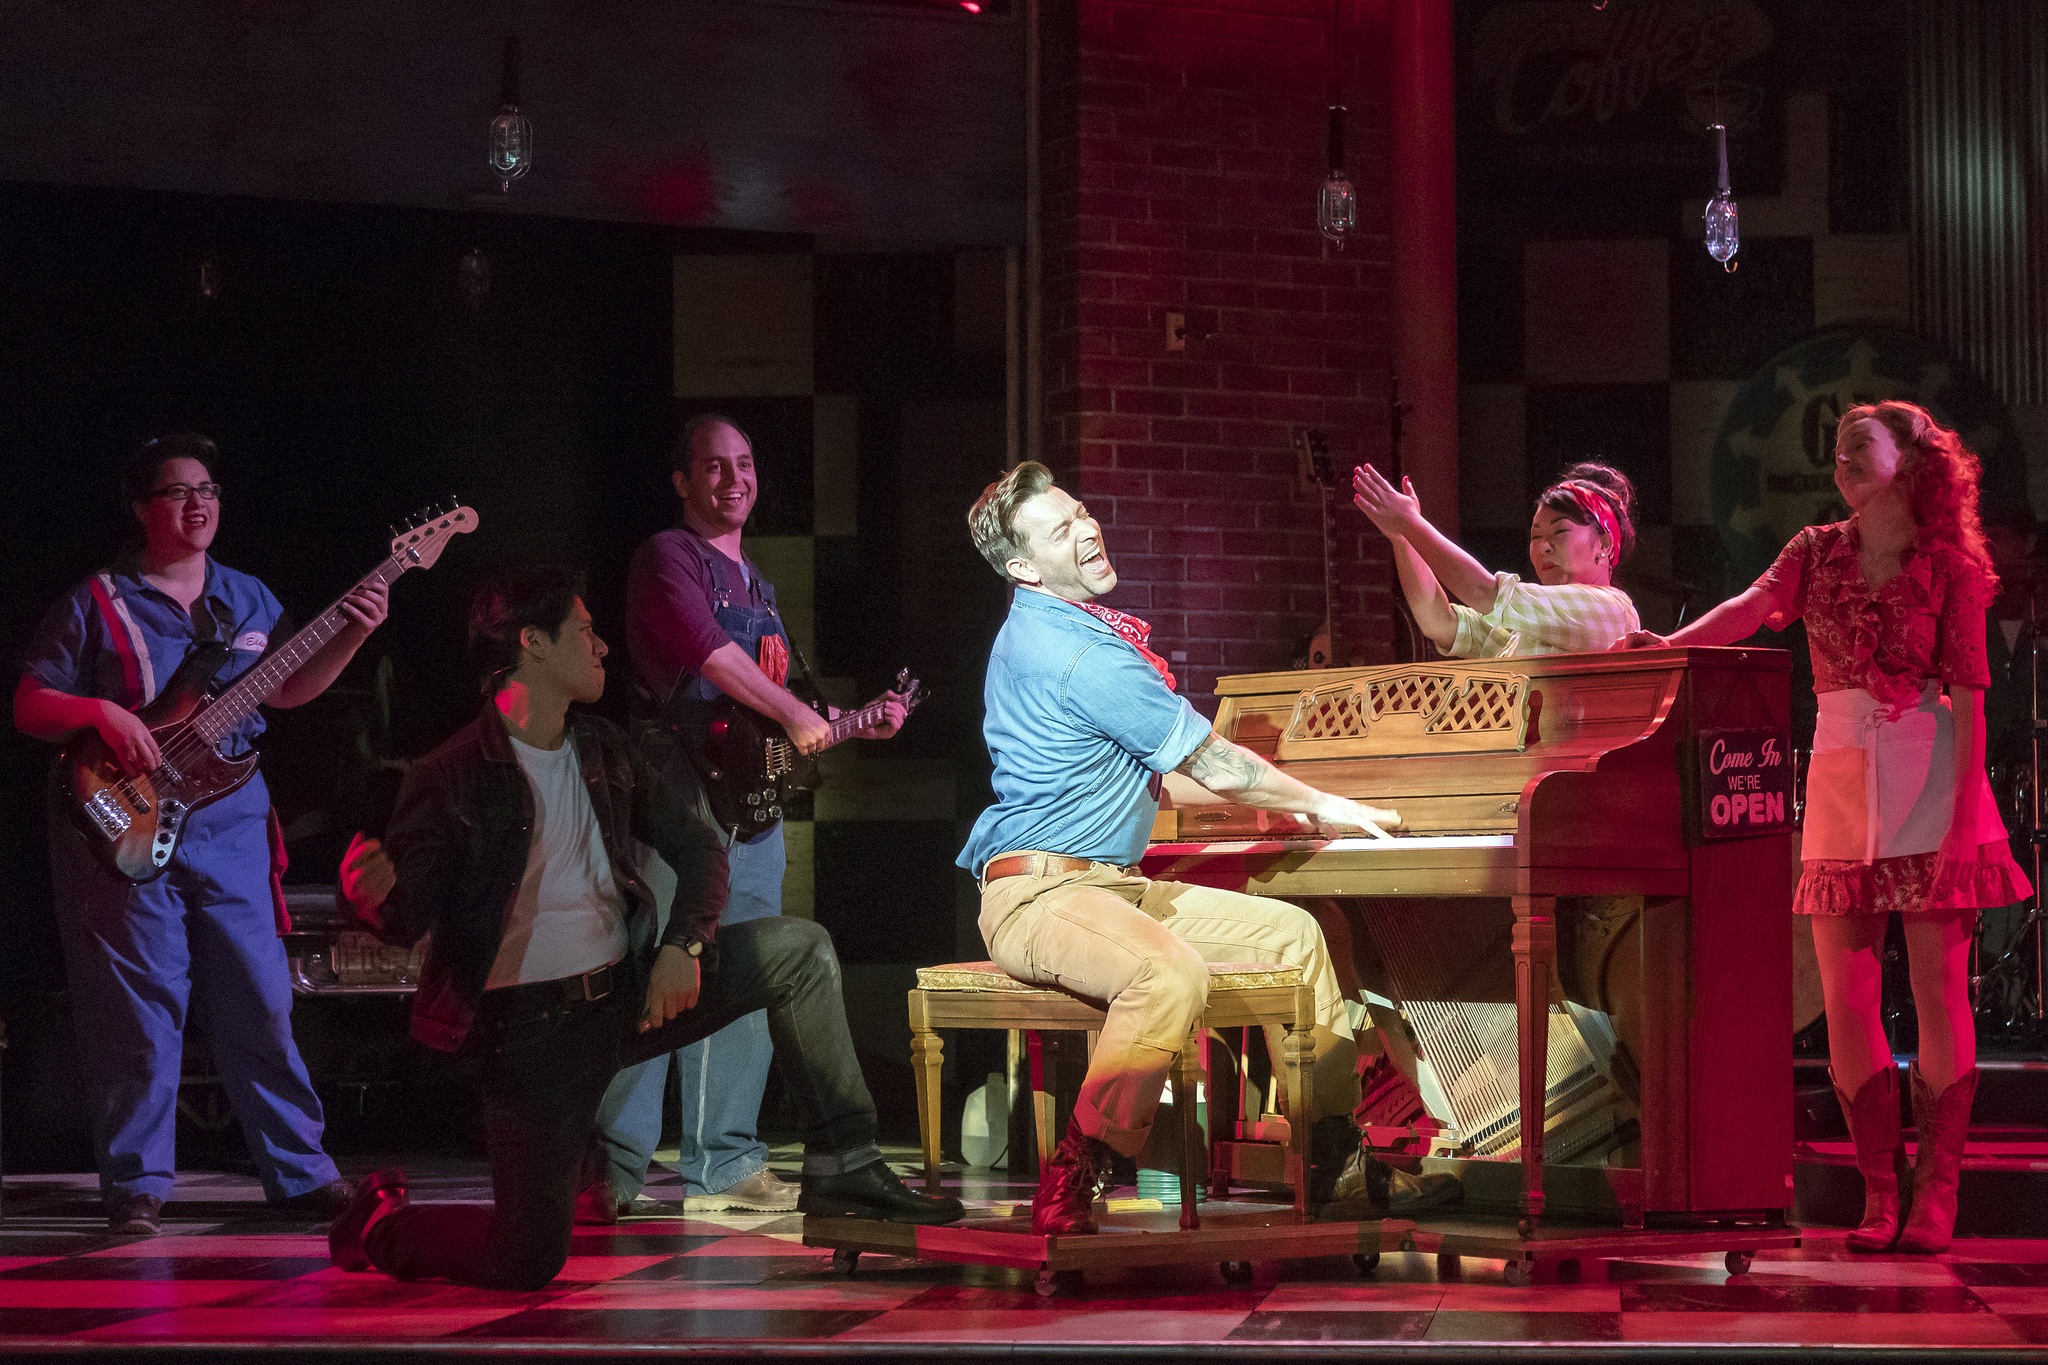 The cast of "Pump Boys and Dinettes" with Tony-winner Levi Kreis impressively rocking out on the piano. Photo courtesy of Pump Boys and Dinettes Production